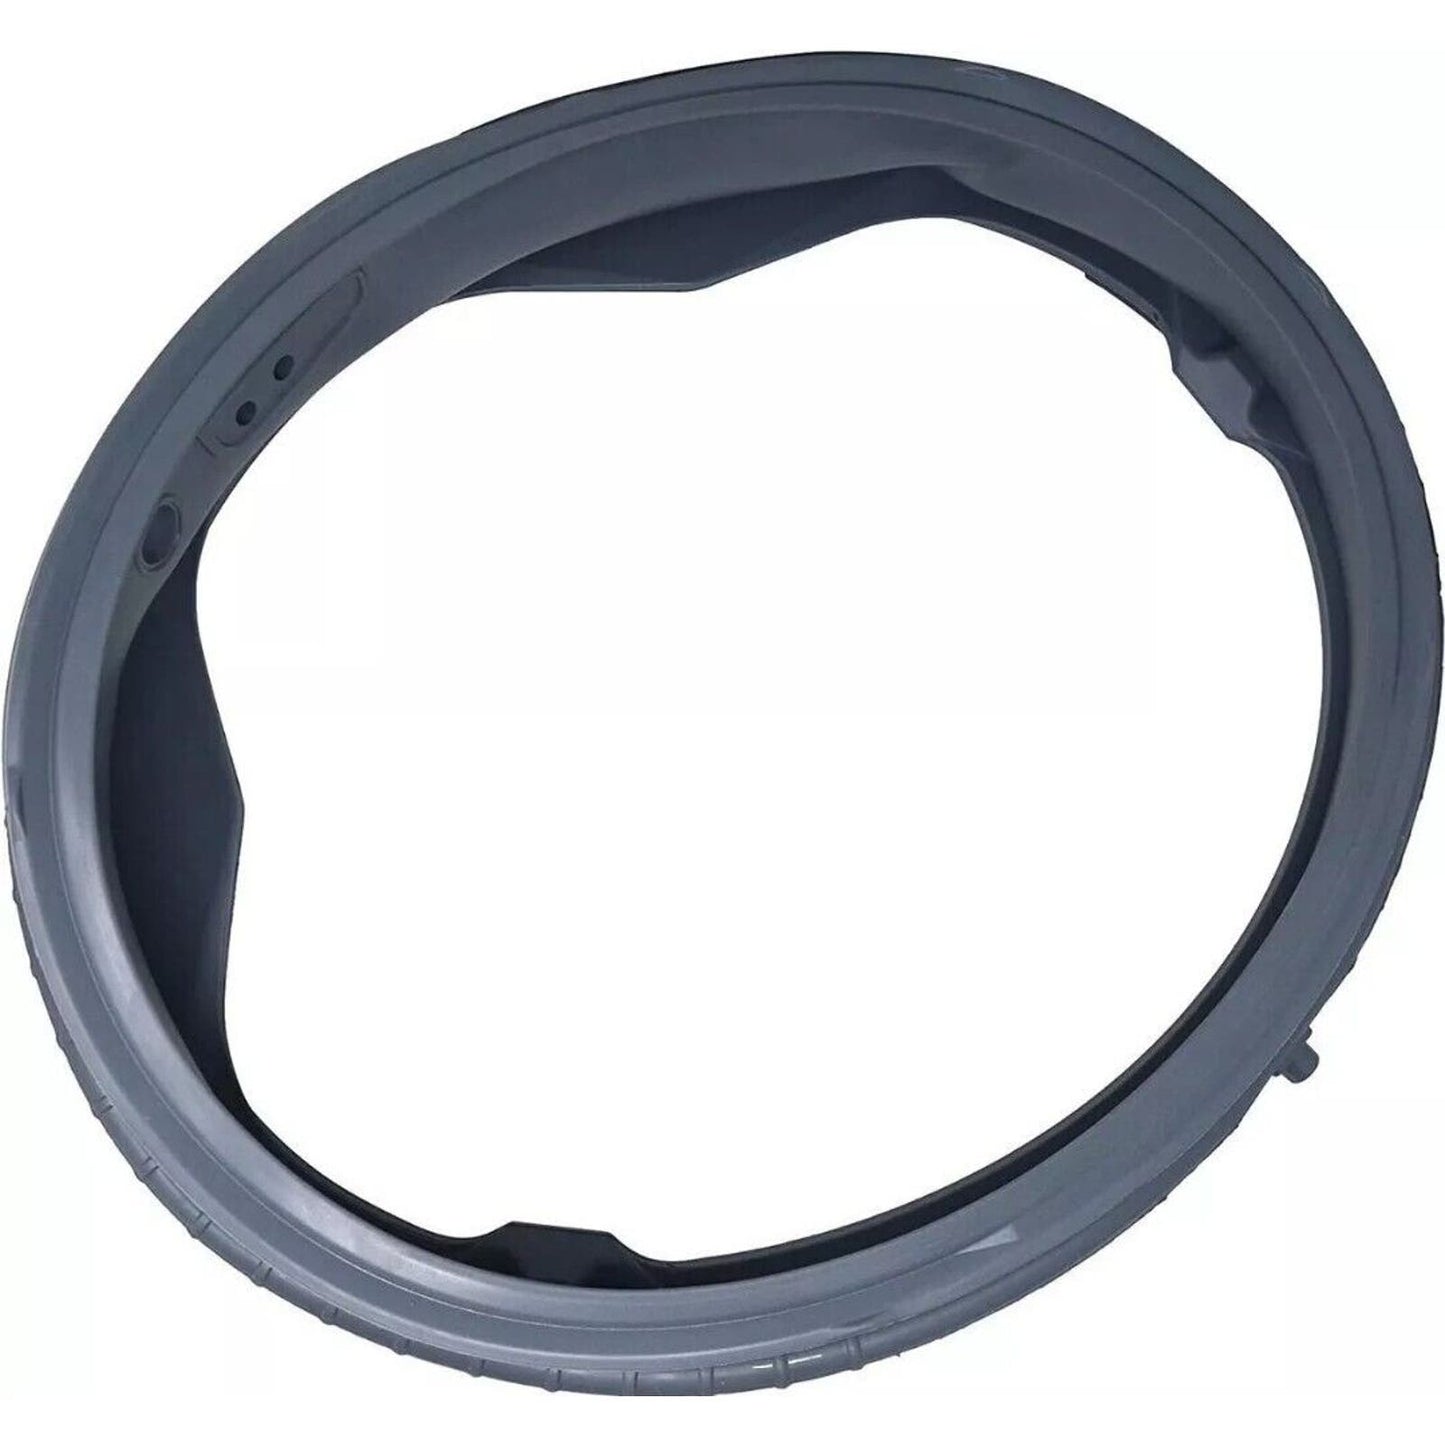 Washer Door Gasket Seal Compatible with LG MDS47123601 AP4998888 PS3535209